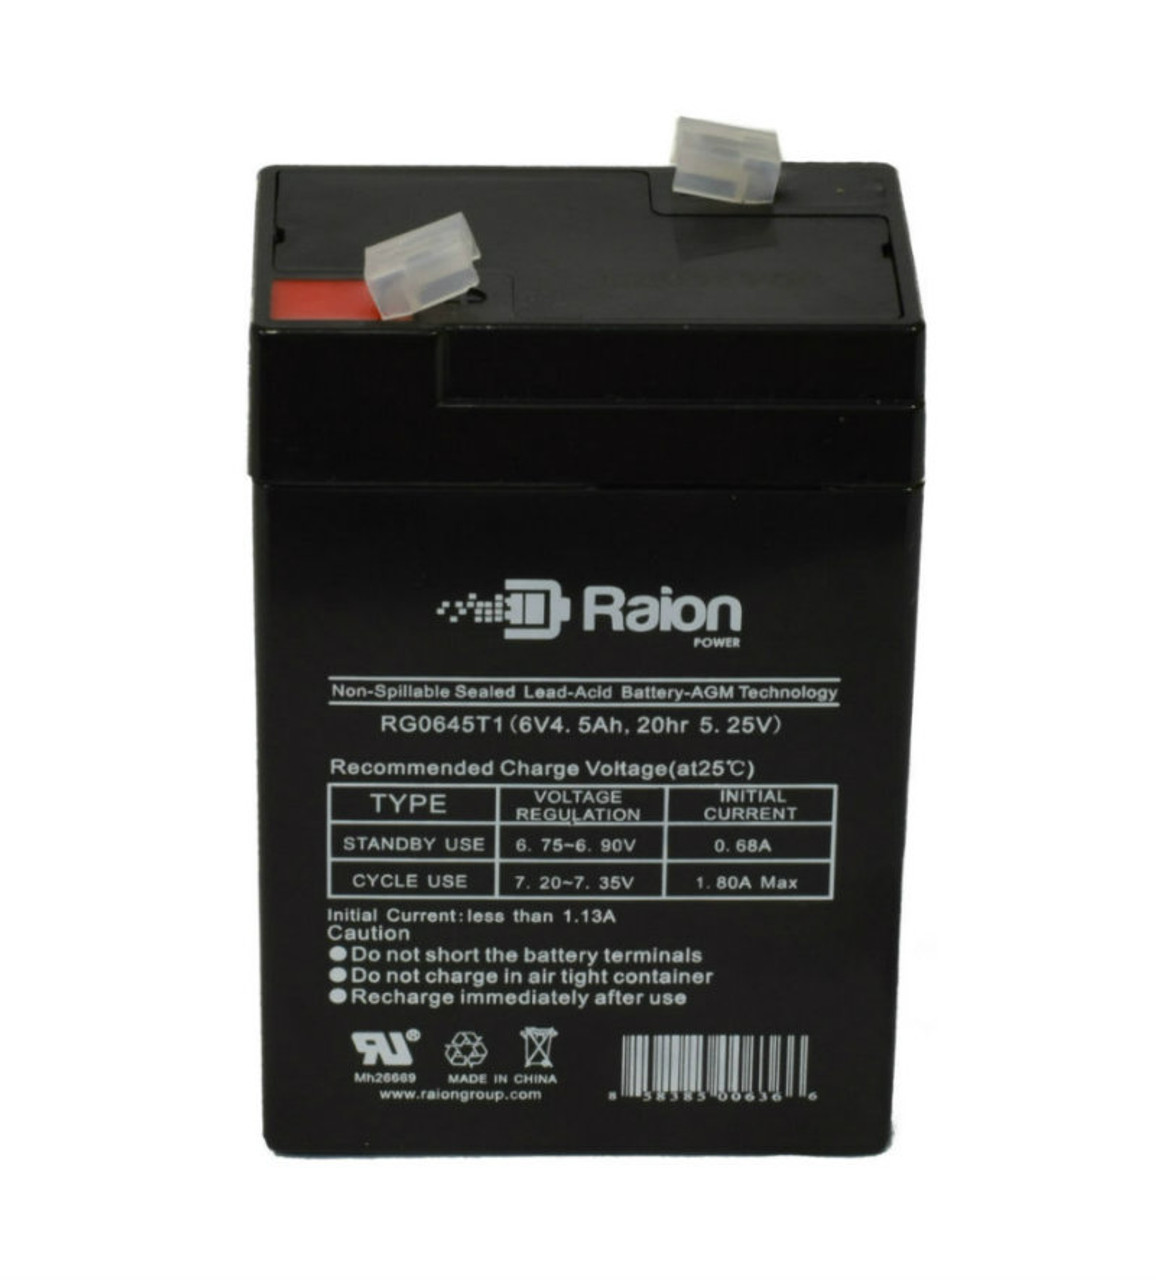 Raion Power RG0645T1 Replacement Battery Cartridge for Tianchang TC6-5